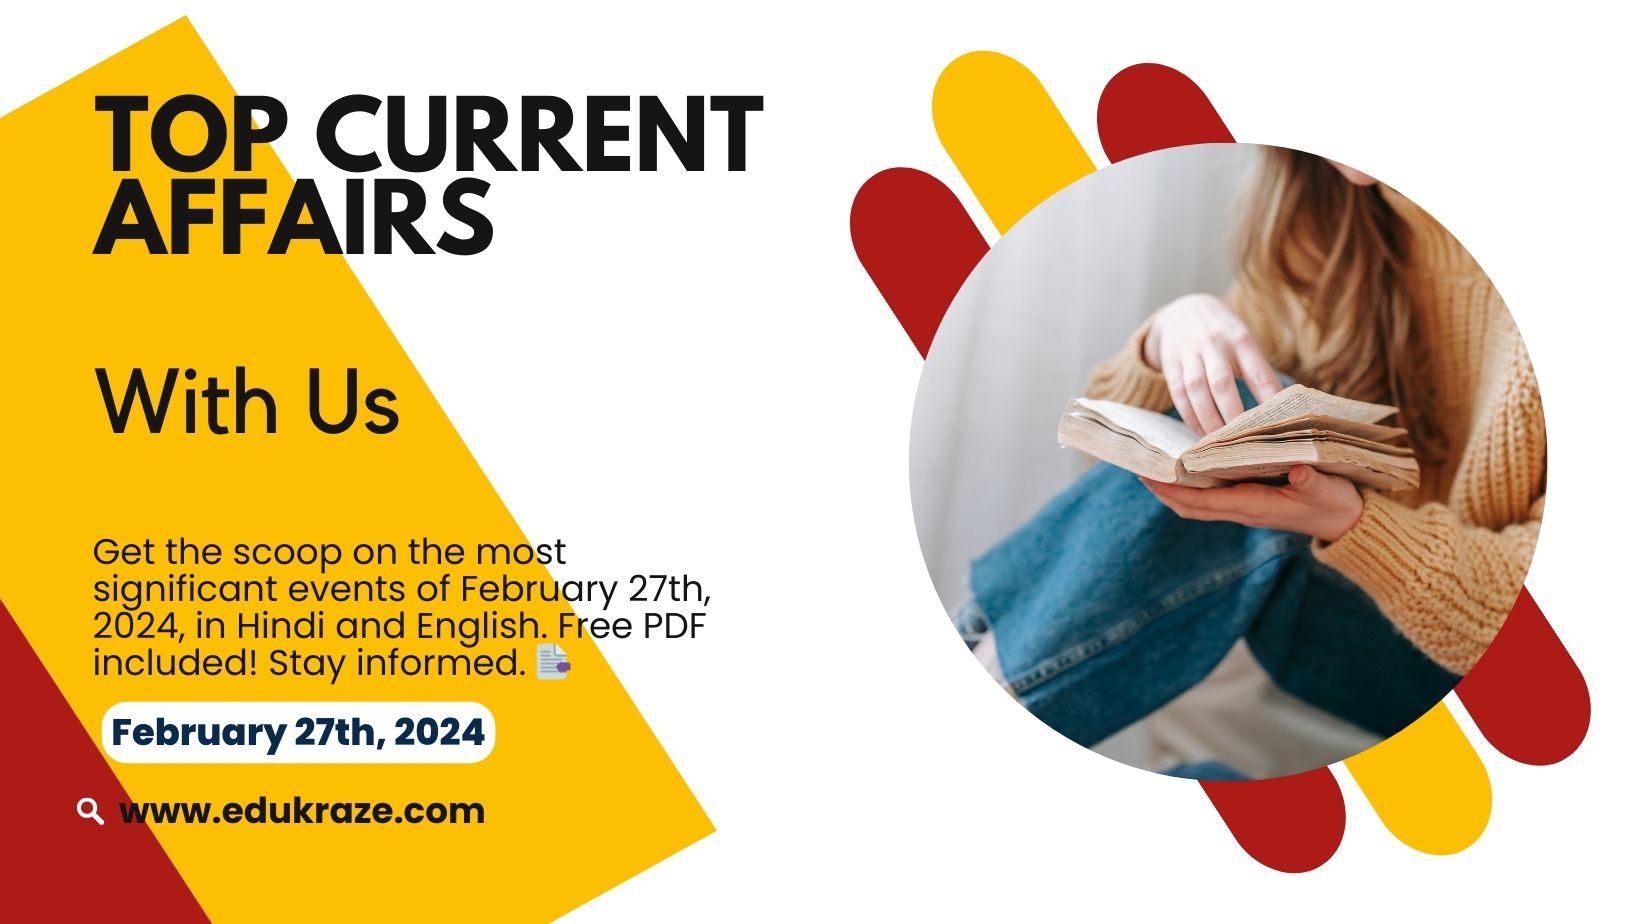 Today’s Top Current Affairs February 27th, 2024 | Hindi and English with Free PDF